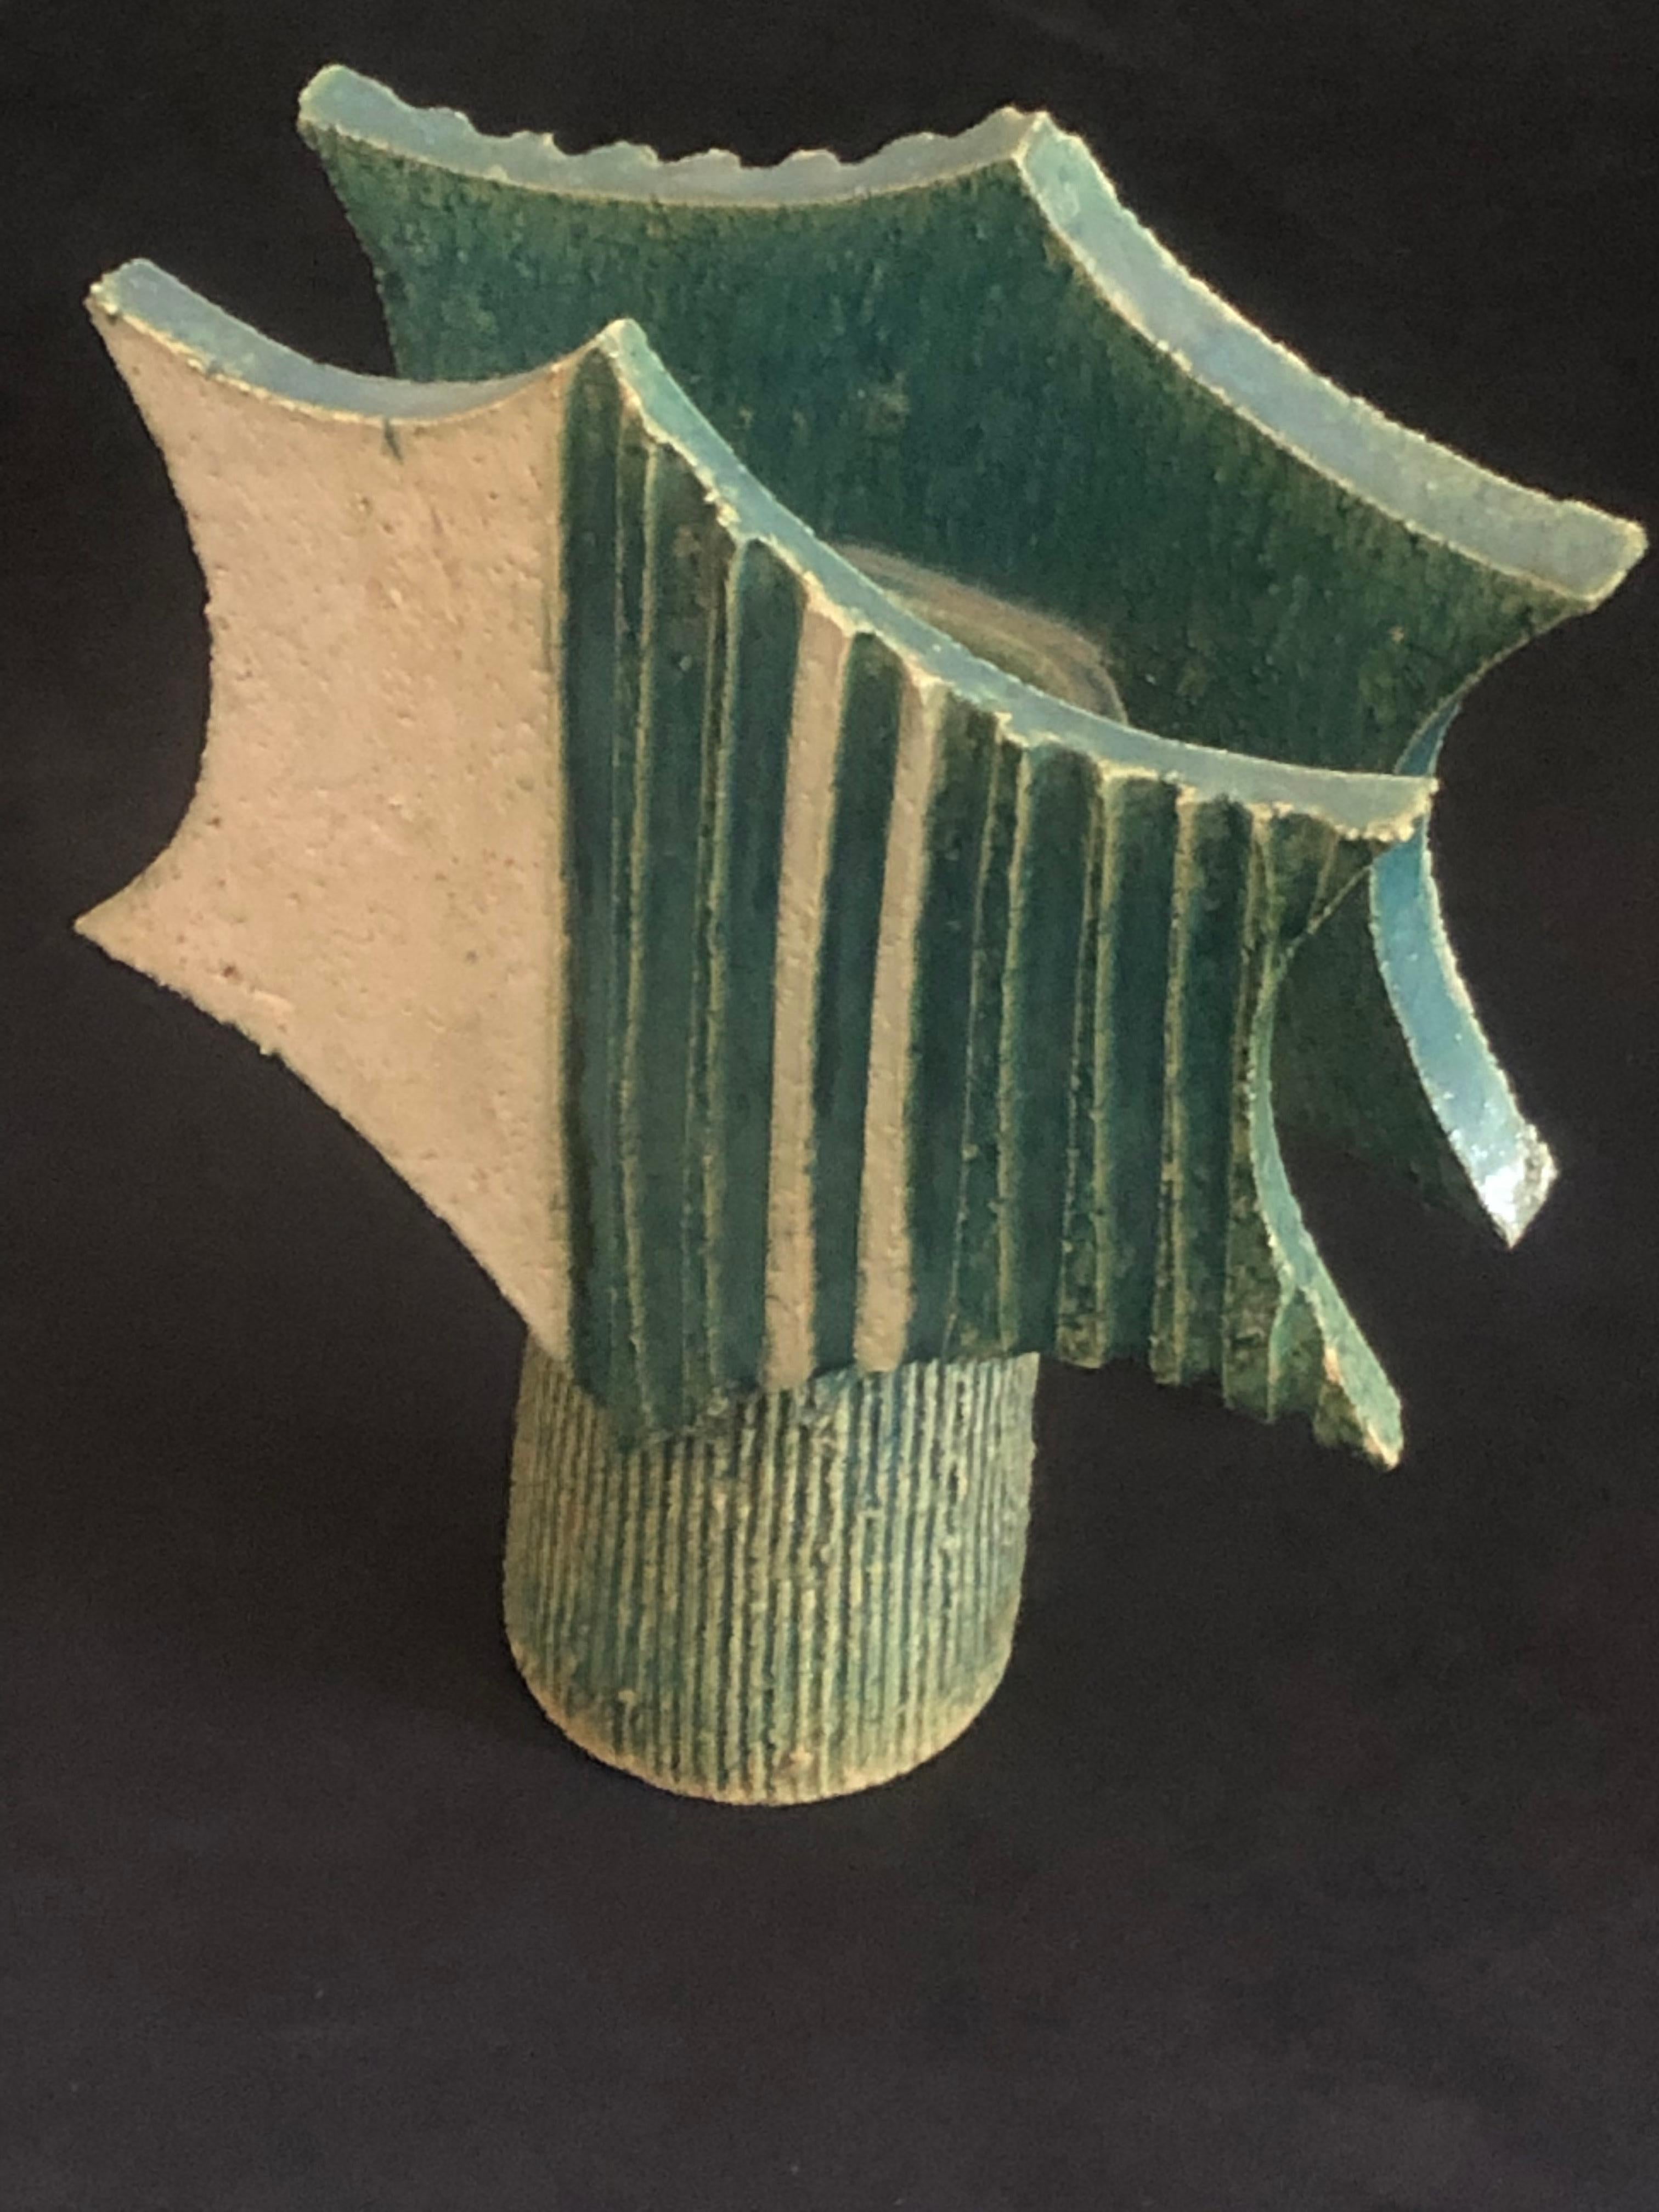 A 1960s Japanase ikebana studio pottery vase.

Star form panels with central cylinder vase with vertical grooves finished in an off-white and green glaze.

'Made in Japan' stamp to base.

Ikebana (